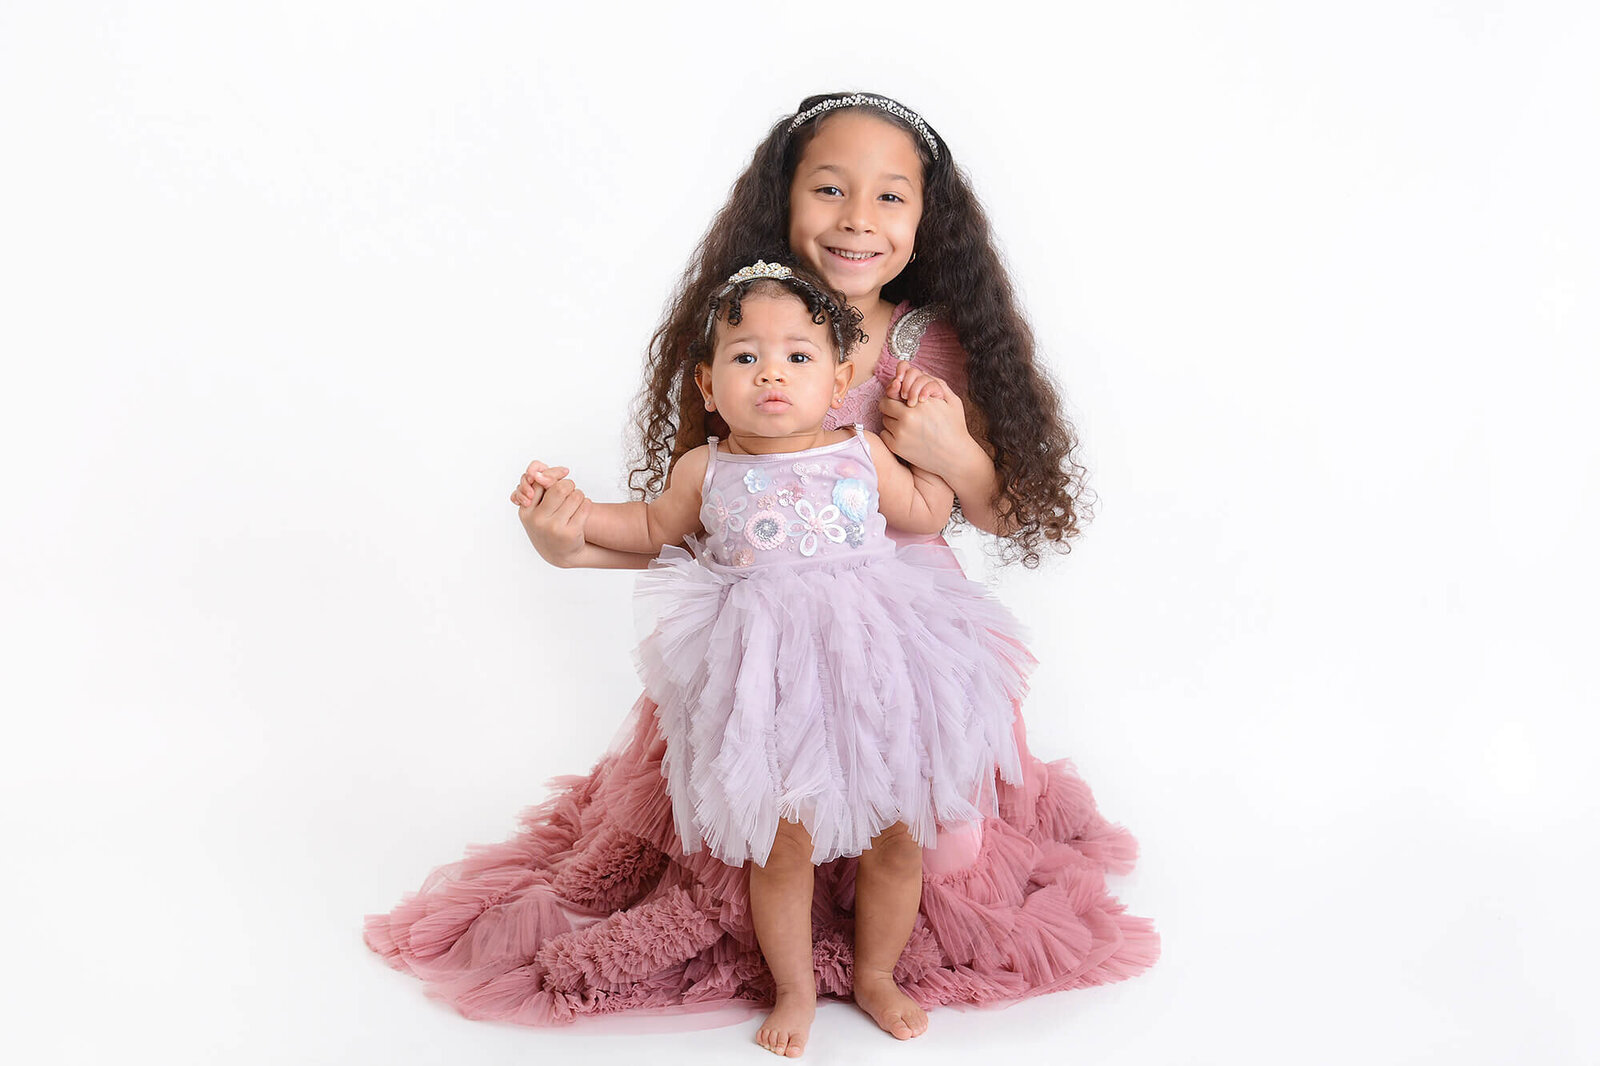 big sister cuddles up to her baby sister at their photoshoot